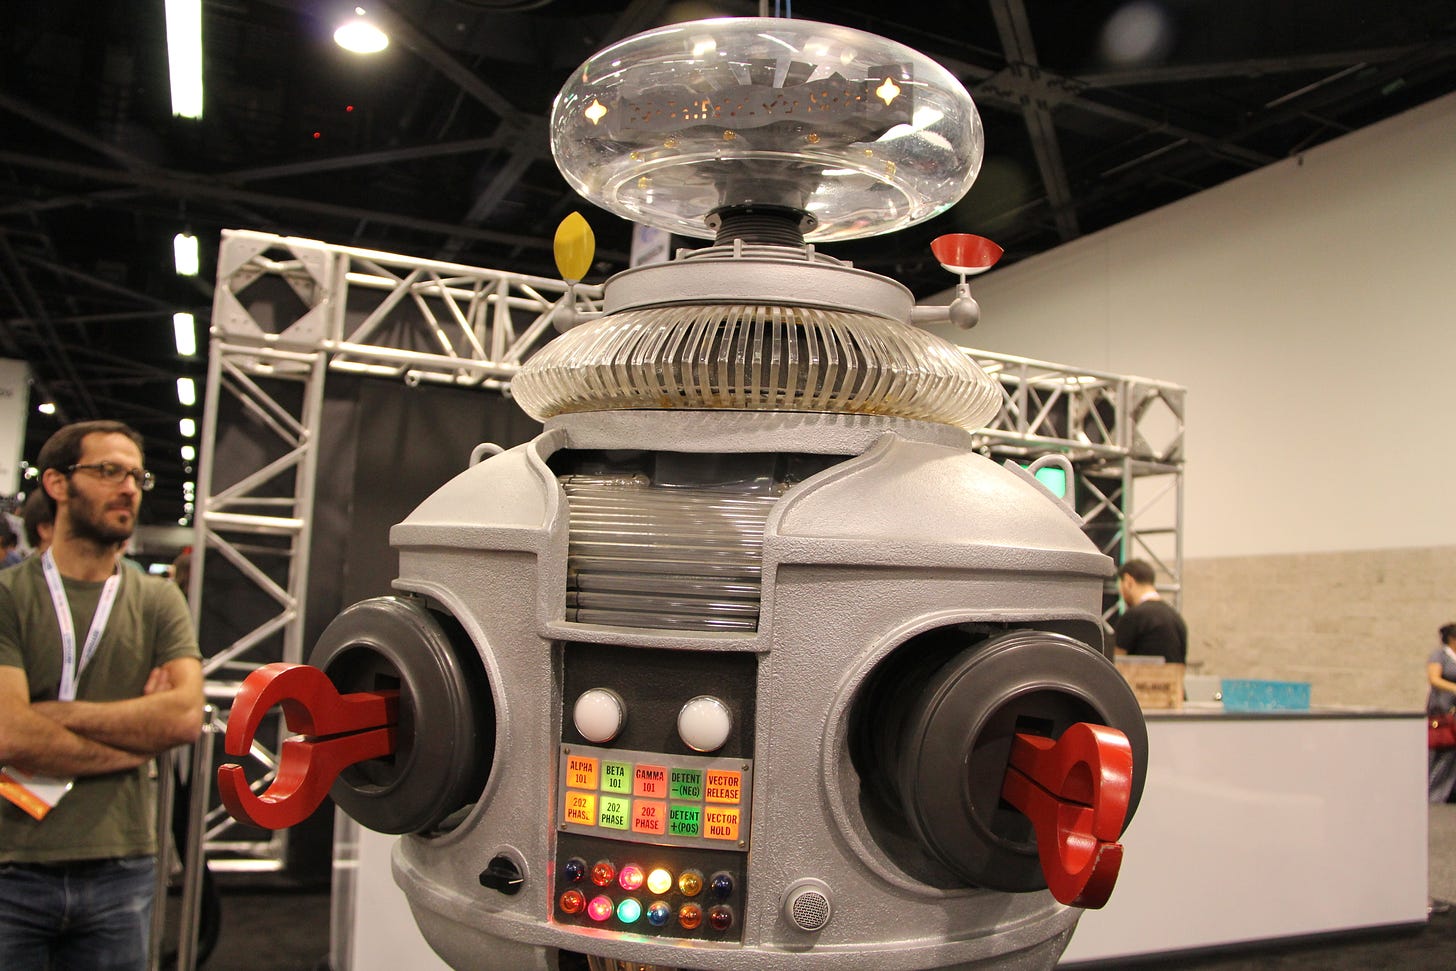 CC-BY licensed photo of the robot from Lost In Space by William Tung on Flickr at https://www.flickr.com/photos/28277470@N05/17048797151